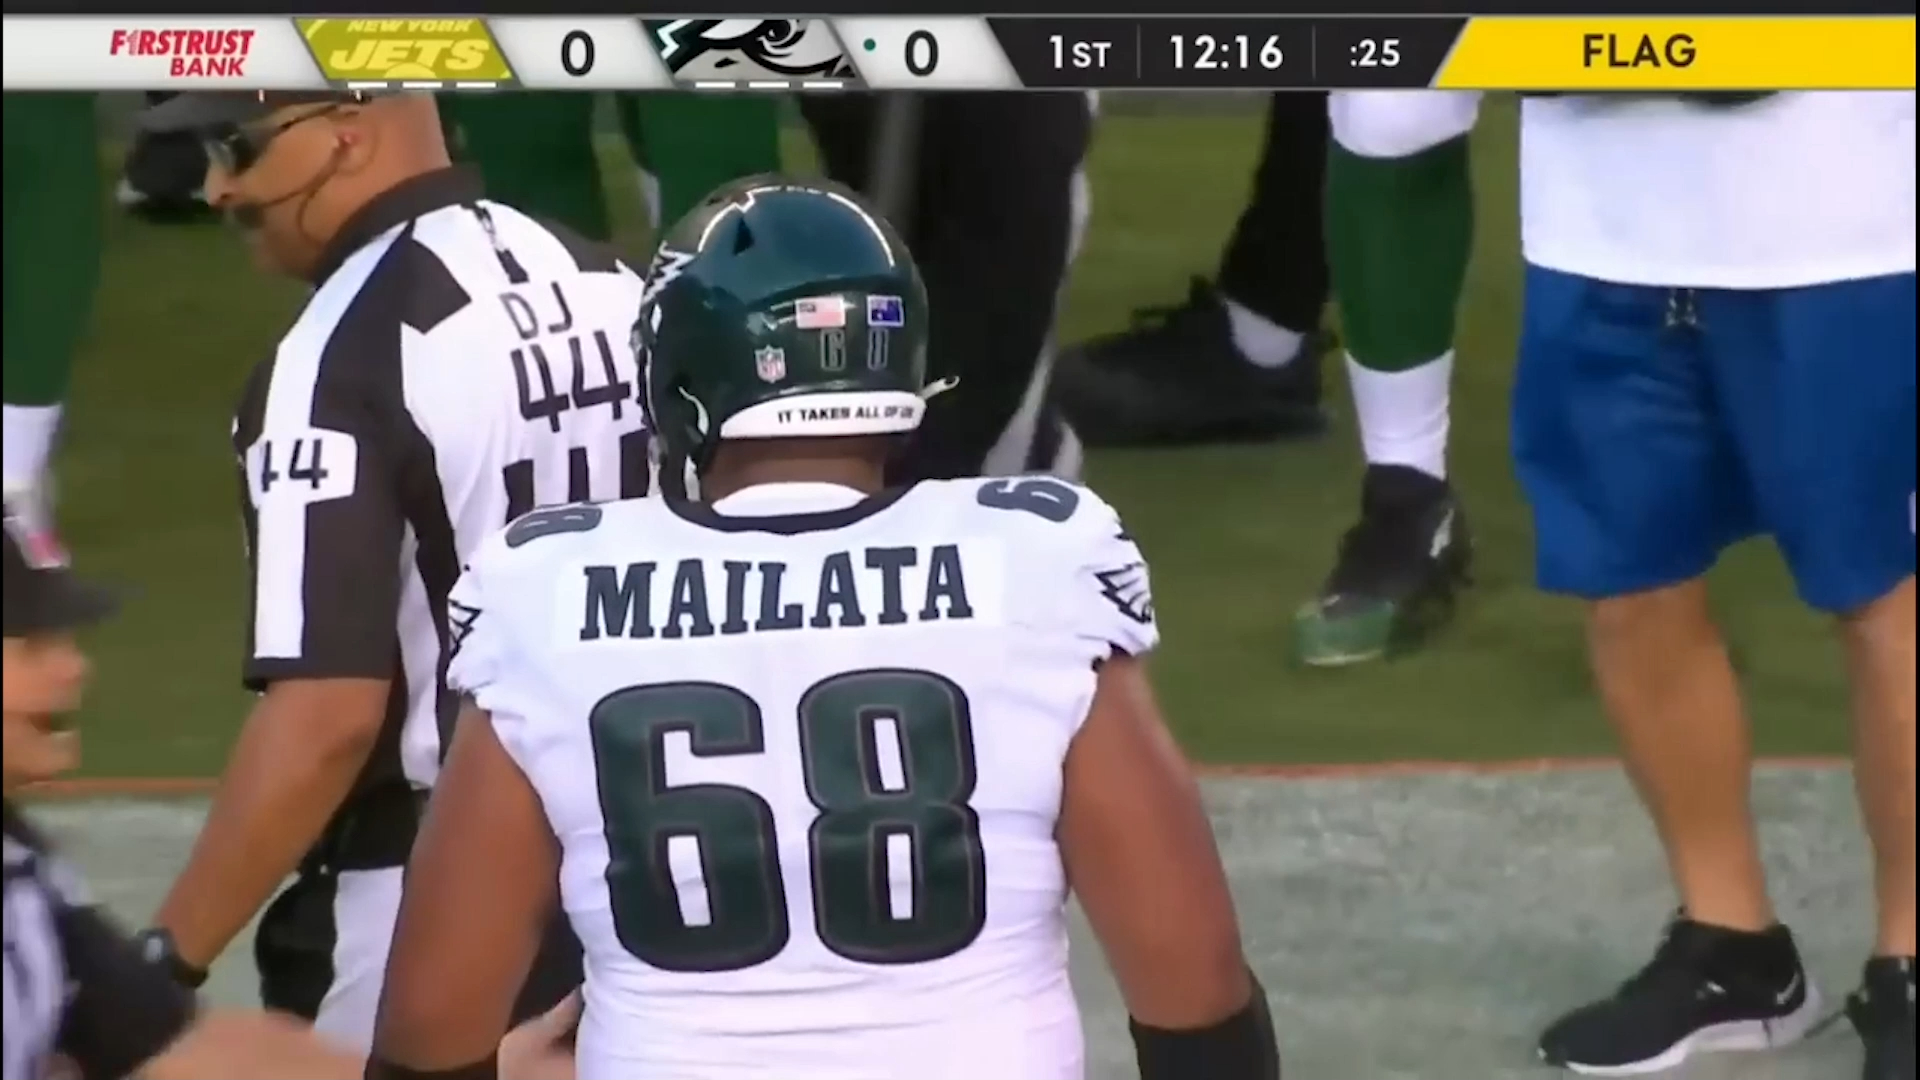 Mailata 'sees red' after 'awful' hit on teammate